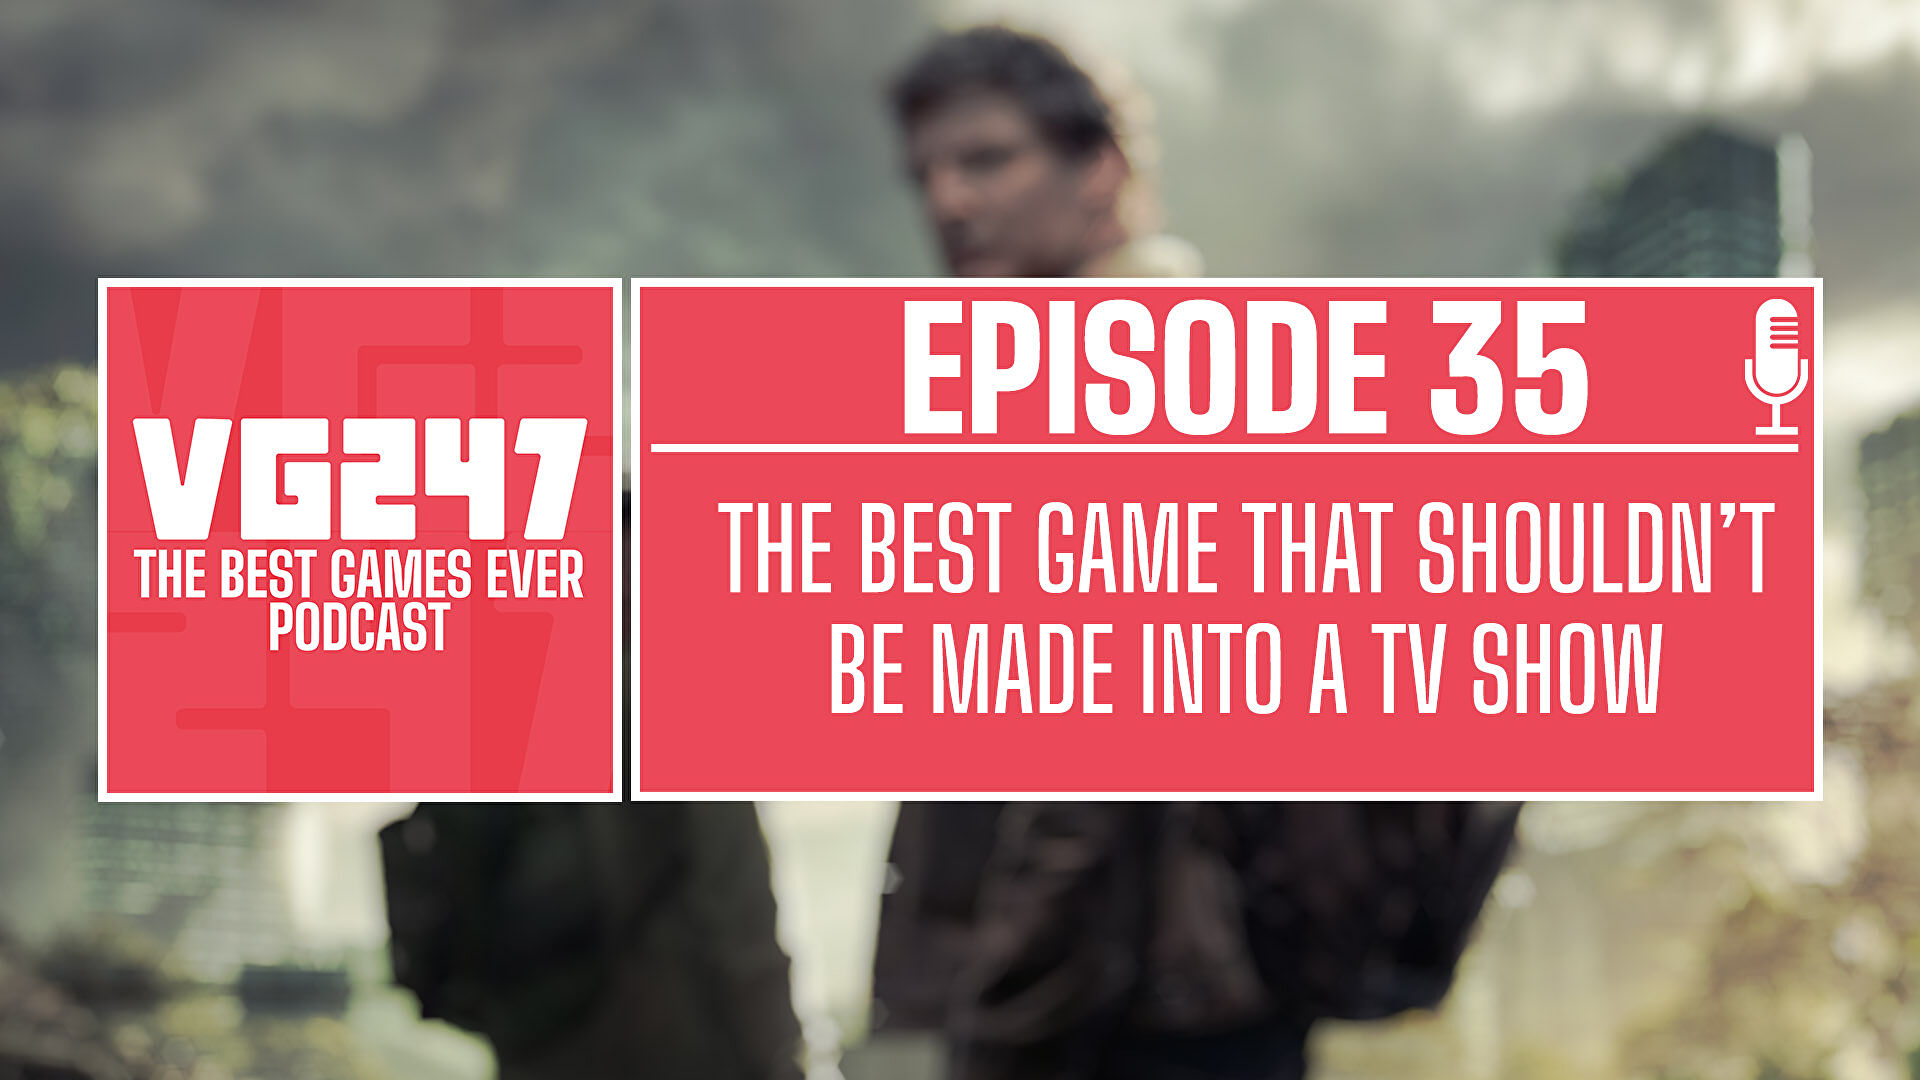 VG247’s The Best Games Ever Podcast – Ep.35: The best game that shouldn’t be made into a TV show